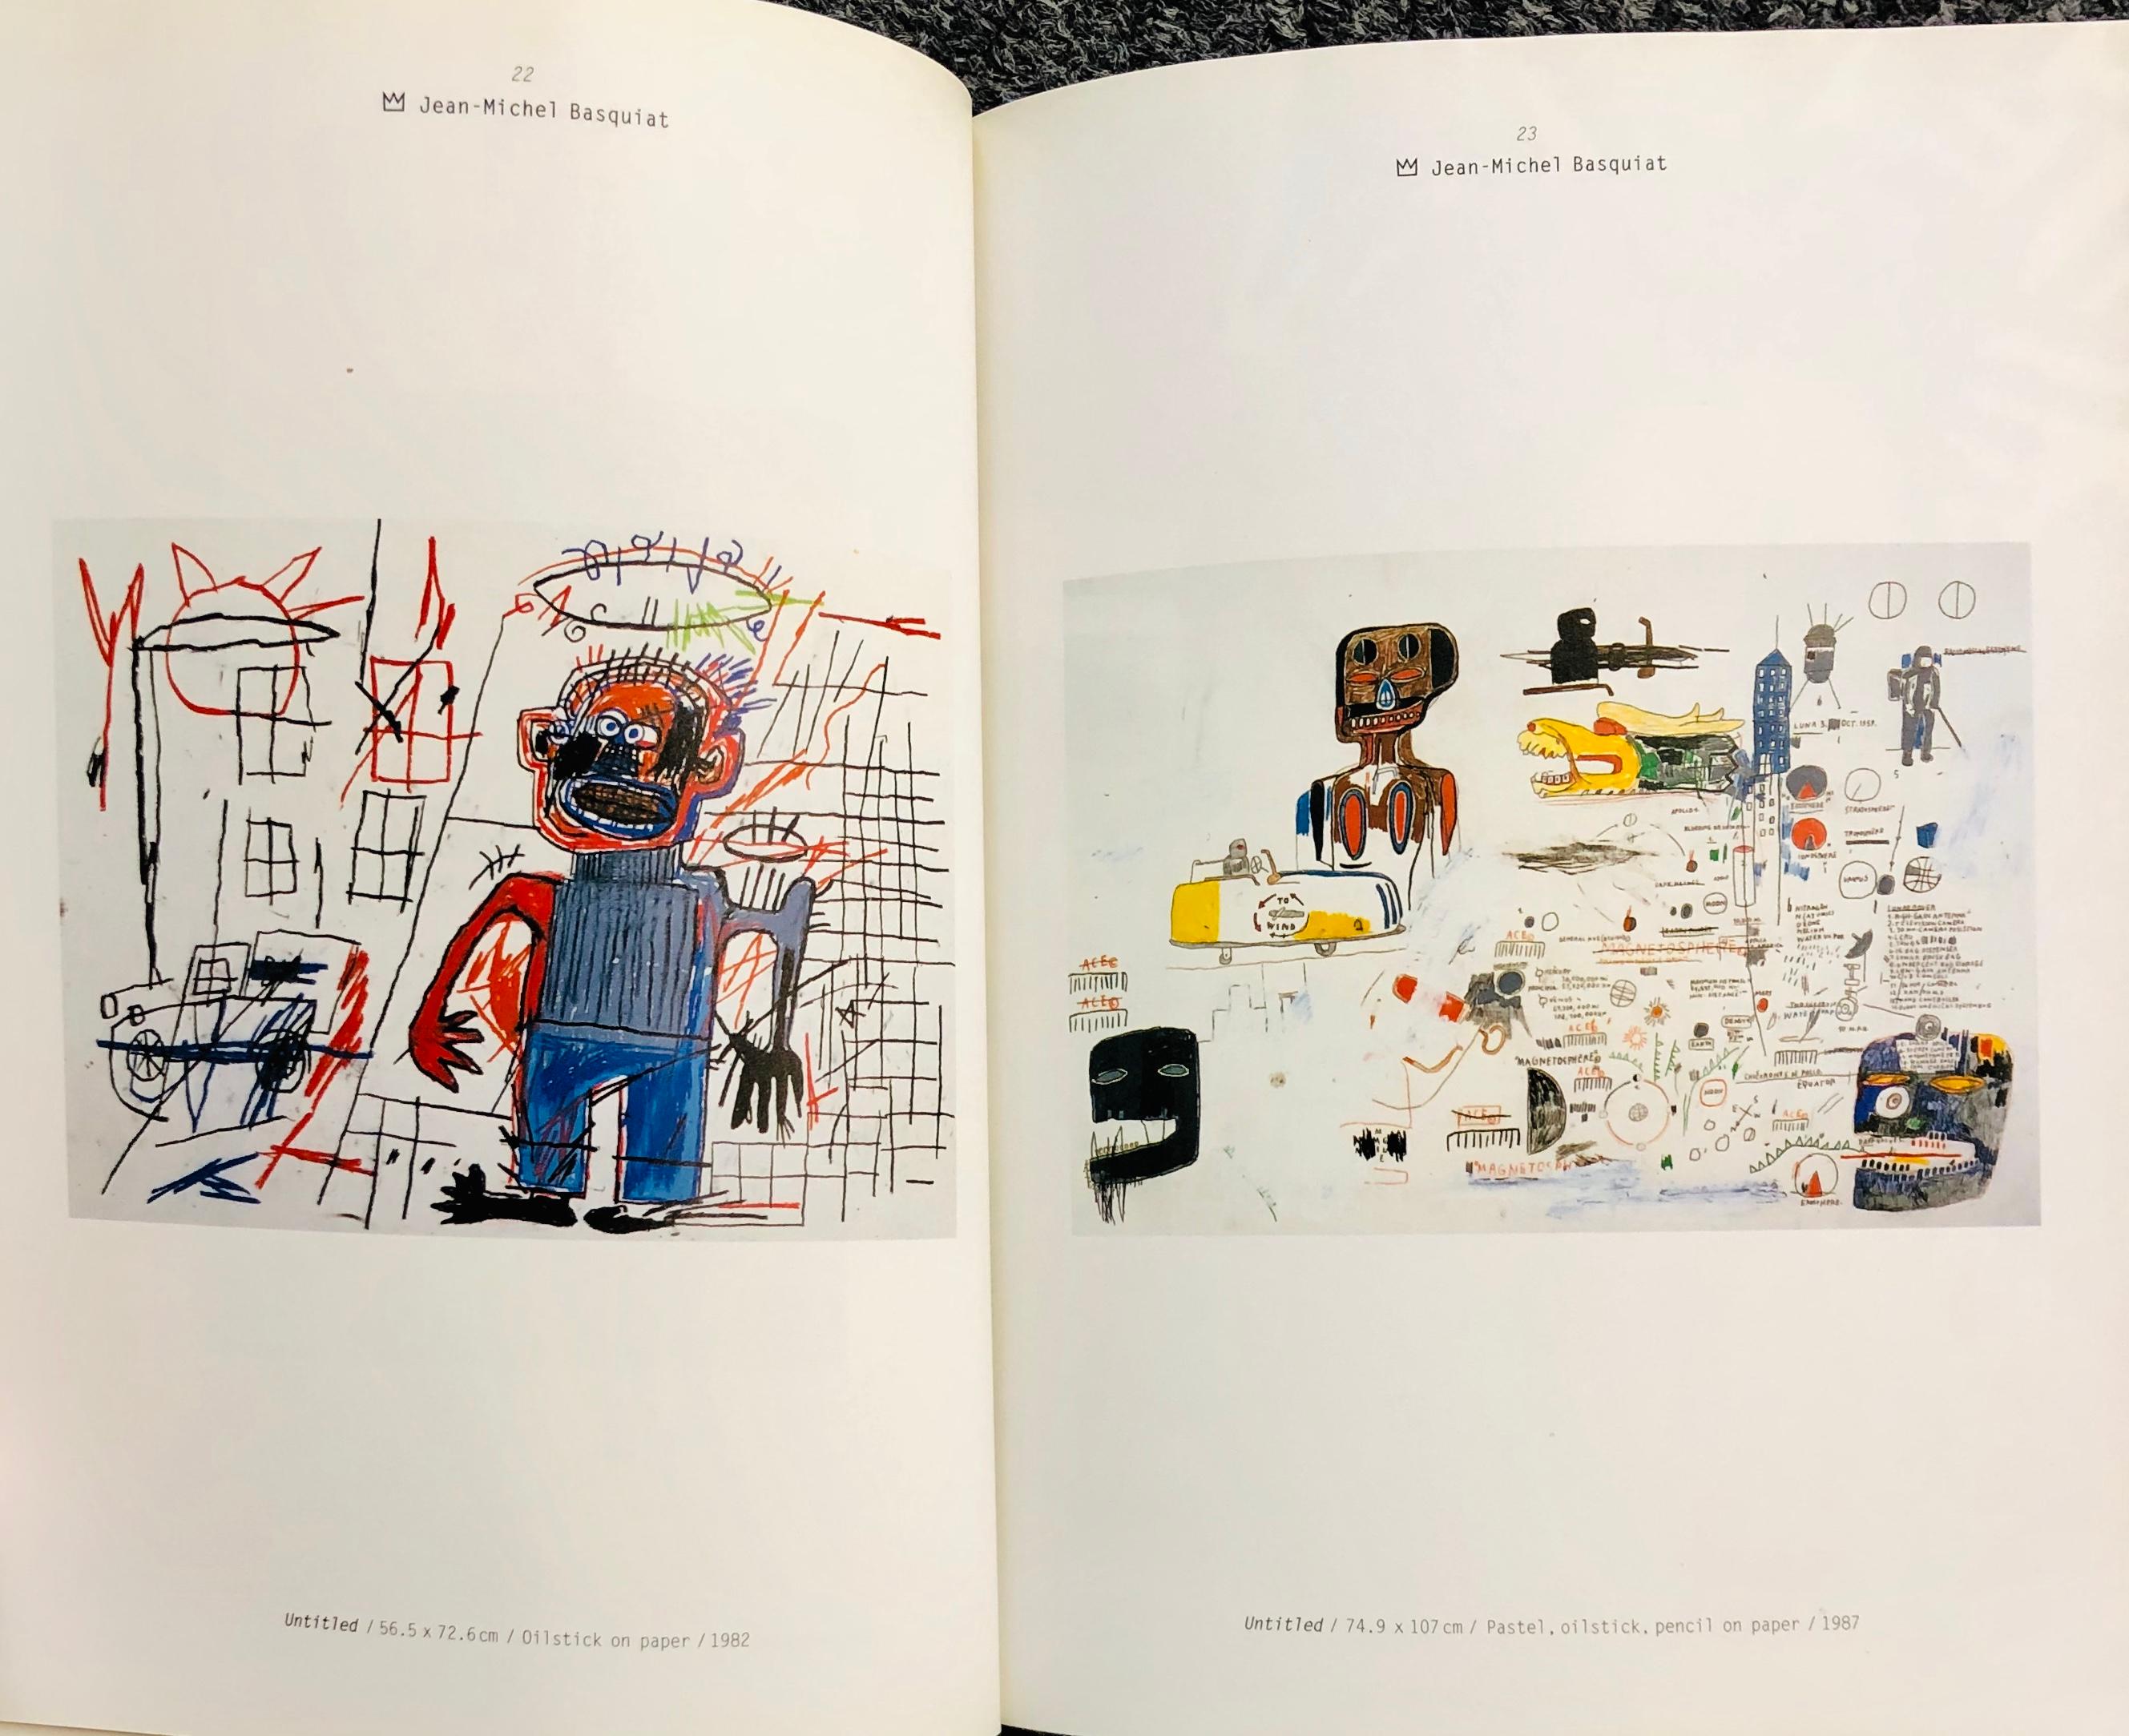 Basquiat Haring & Kenny Scharf at Lio Malca:
Rare 1990s hardcover catalogue featuring works by Jean-Michel Basquiat, Keith Haring, & Kenny Scharf's from the Lio Malca collection

Hardcover, 1998
61 Pages
Text: Japanese 
Measures: 8 × 6